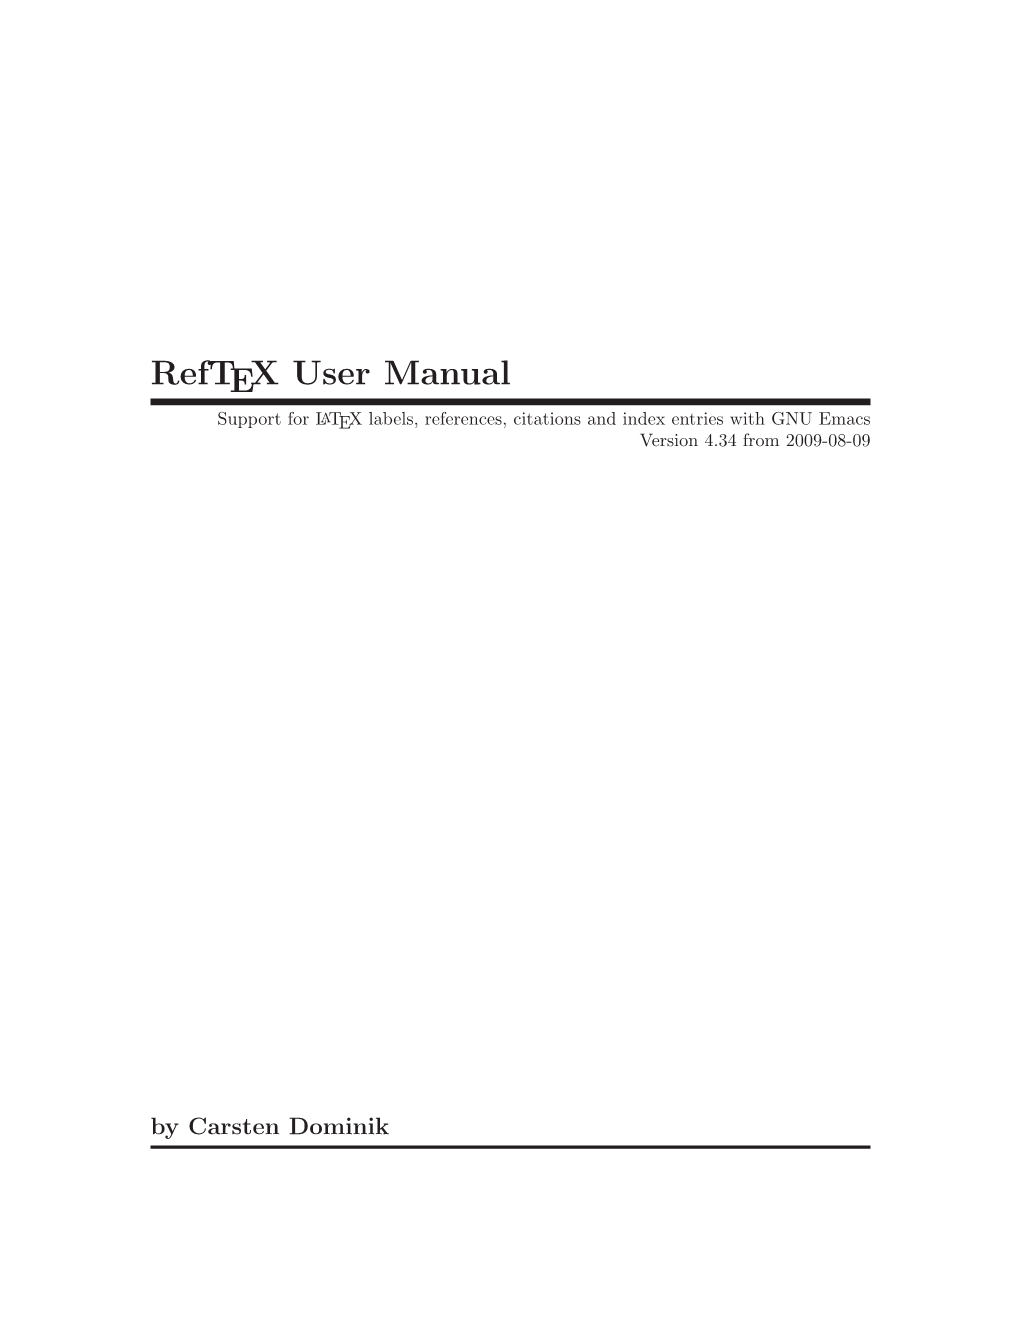 Reftex User Manual Support for Latex Labels, References, Citations and Index Entries with GNU Emacs Version 4.34 from 2009-08-09